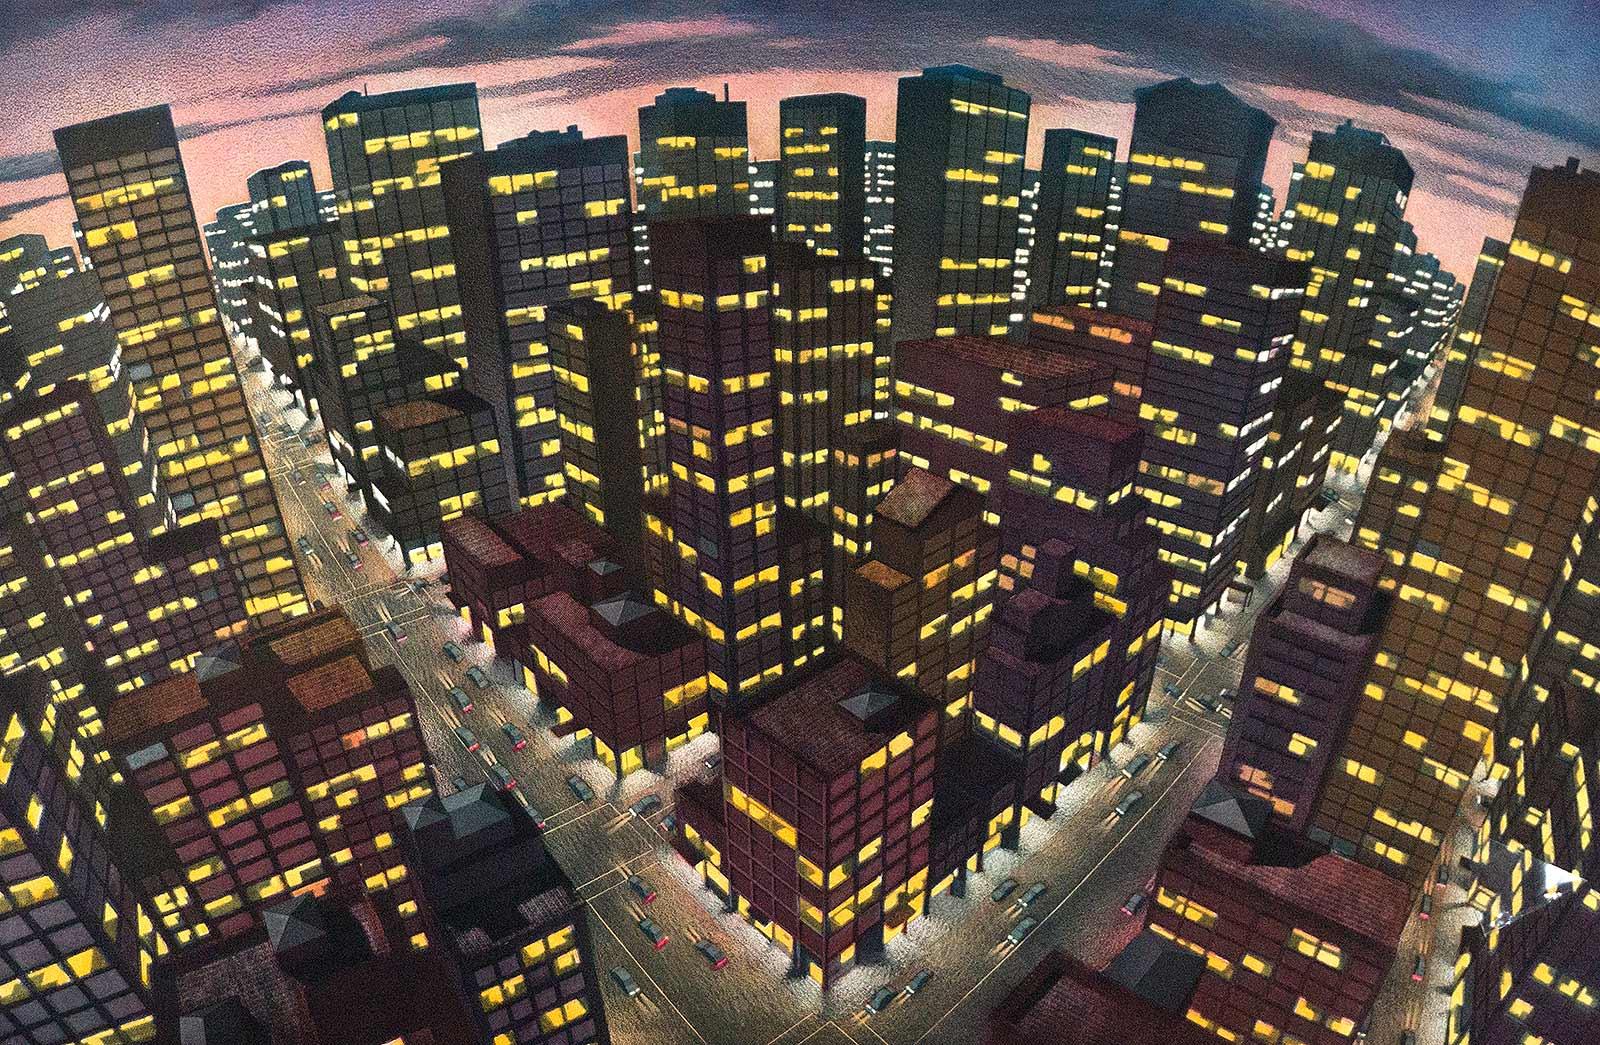 Art Werger Figurative Print - Nocturne (A panorama of lit skyscrapers and moving traffic in the city)